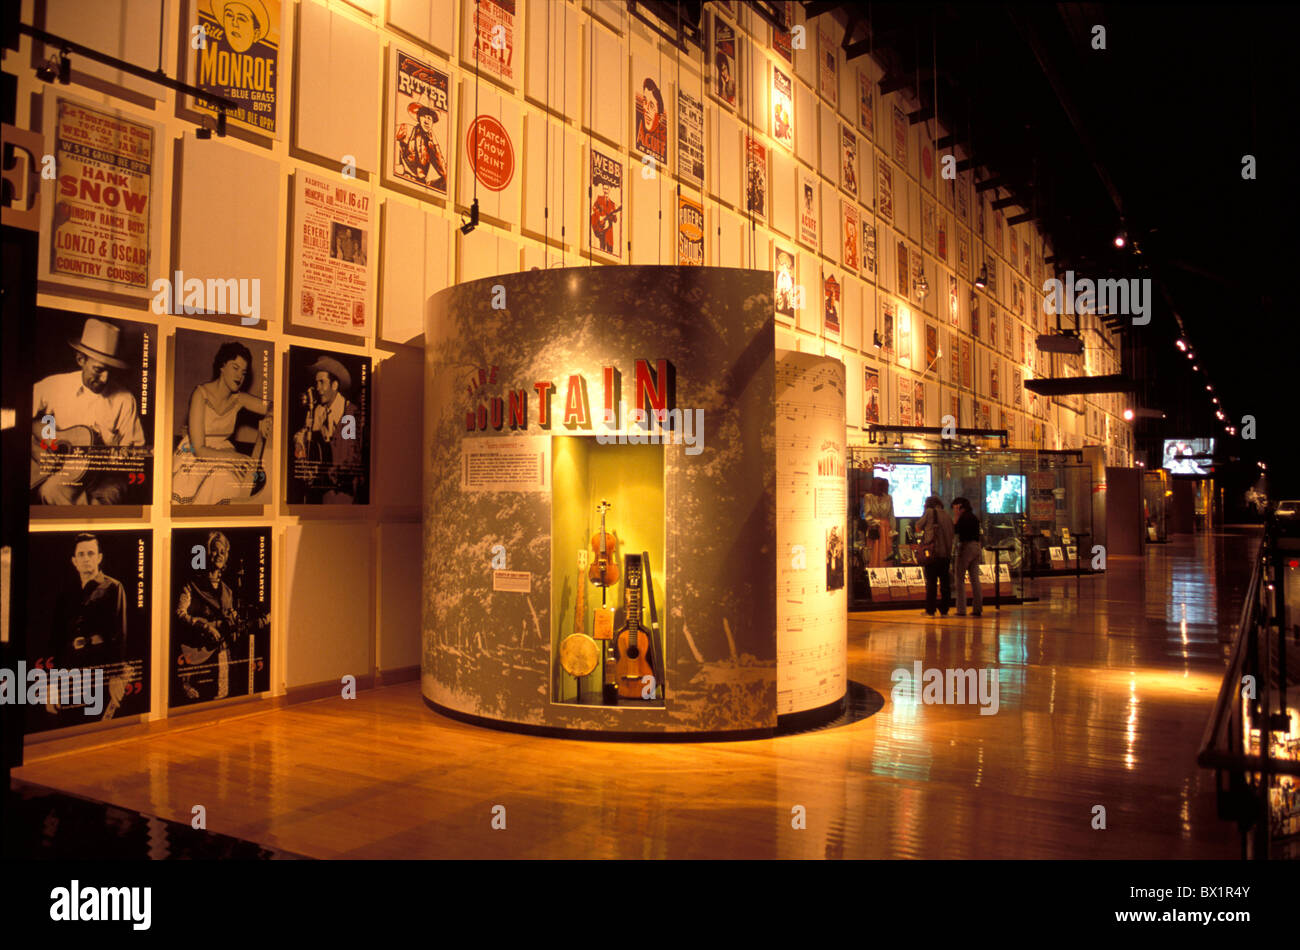 country music Resounding of Fame exhibit museum music Nashville Tennessee USA America United States visitor Stock Photo